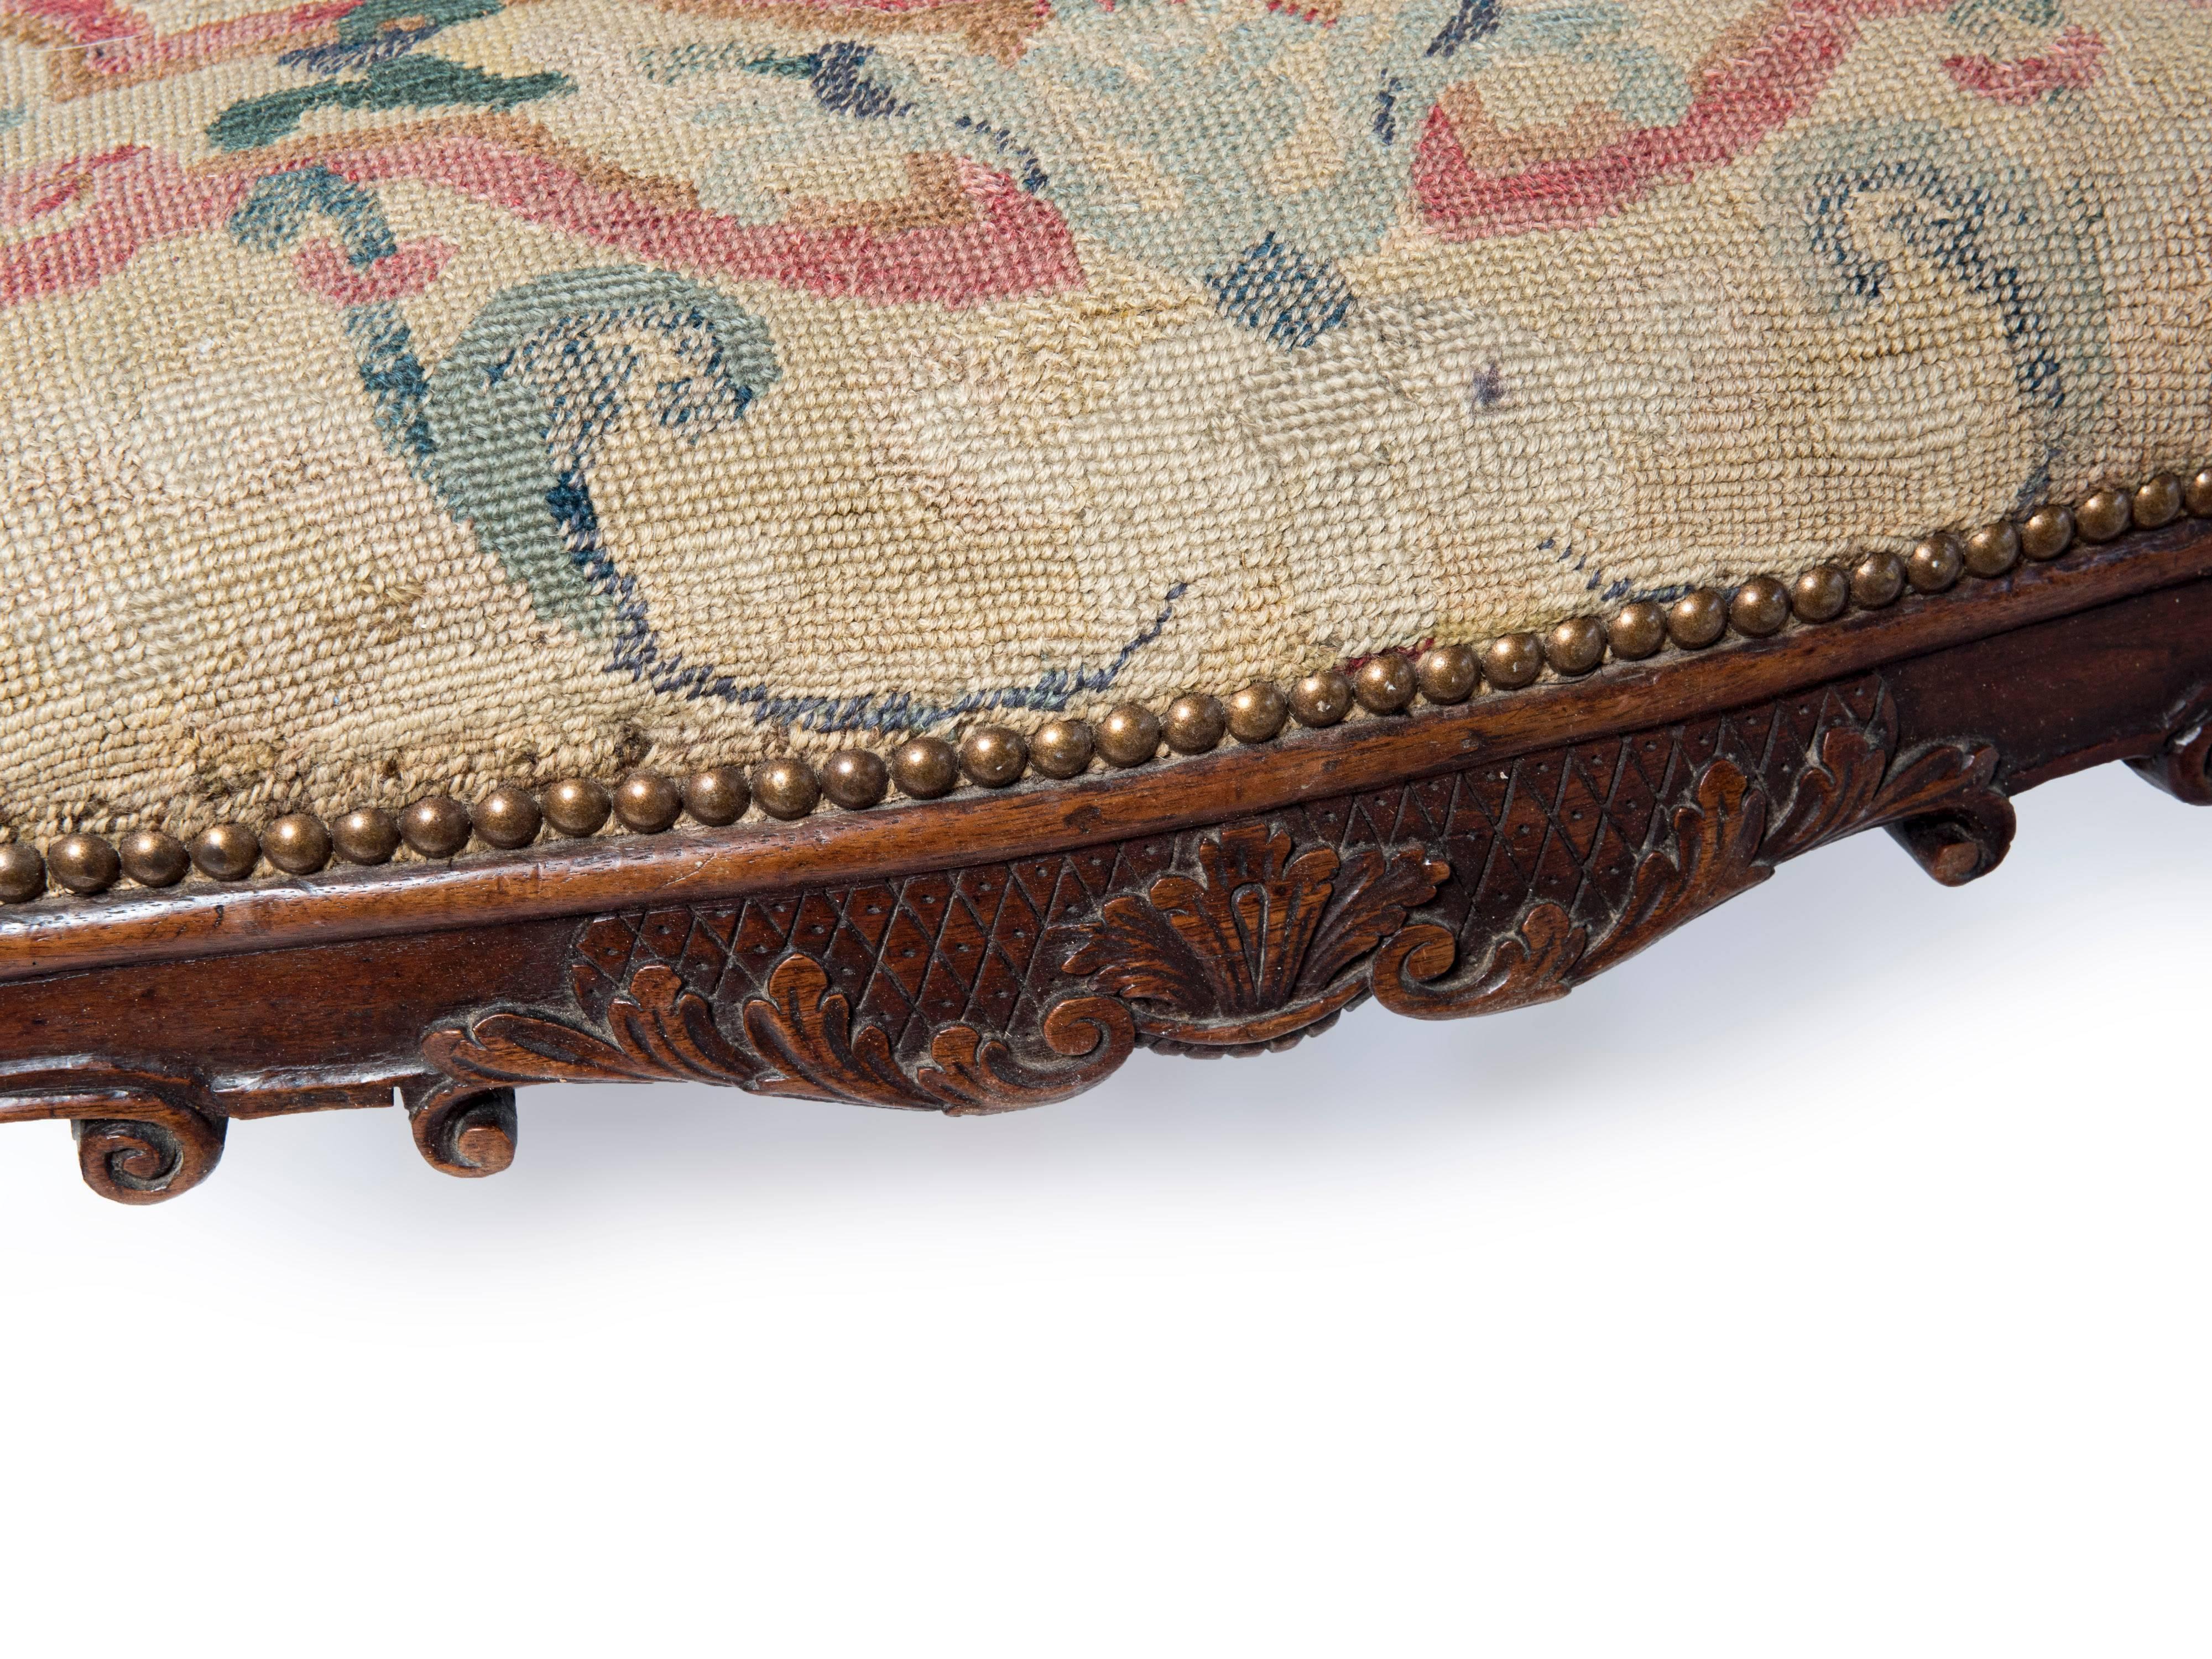 Regency Fauteuil with Petit Point Upholstery In Good Condition For Sale In Washington, DC